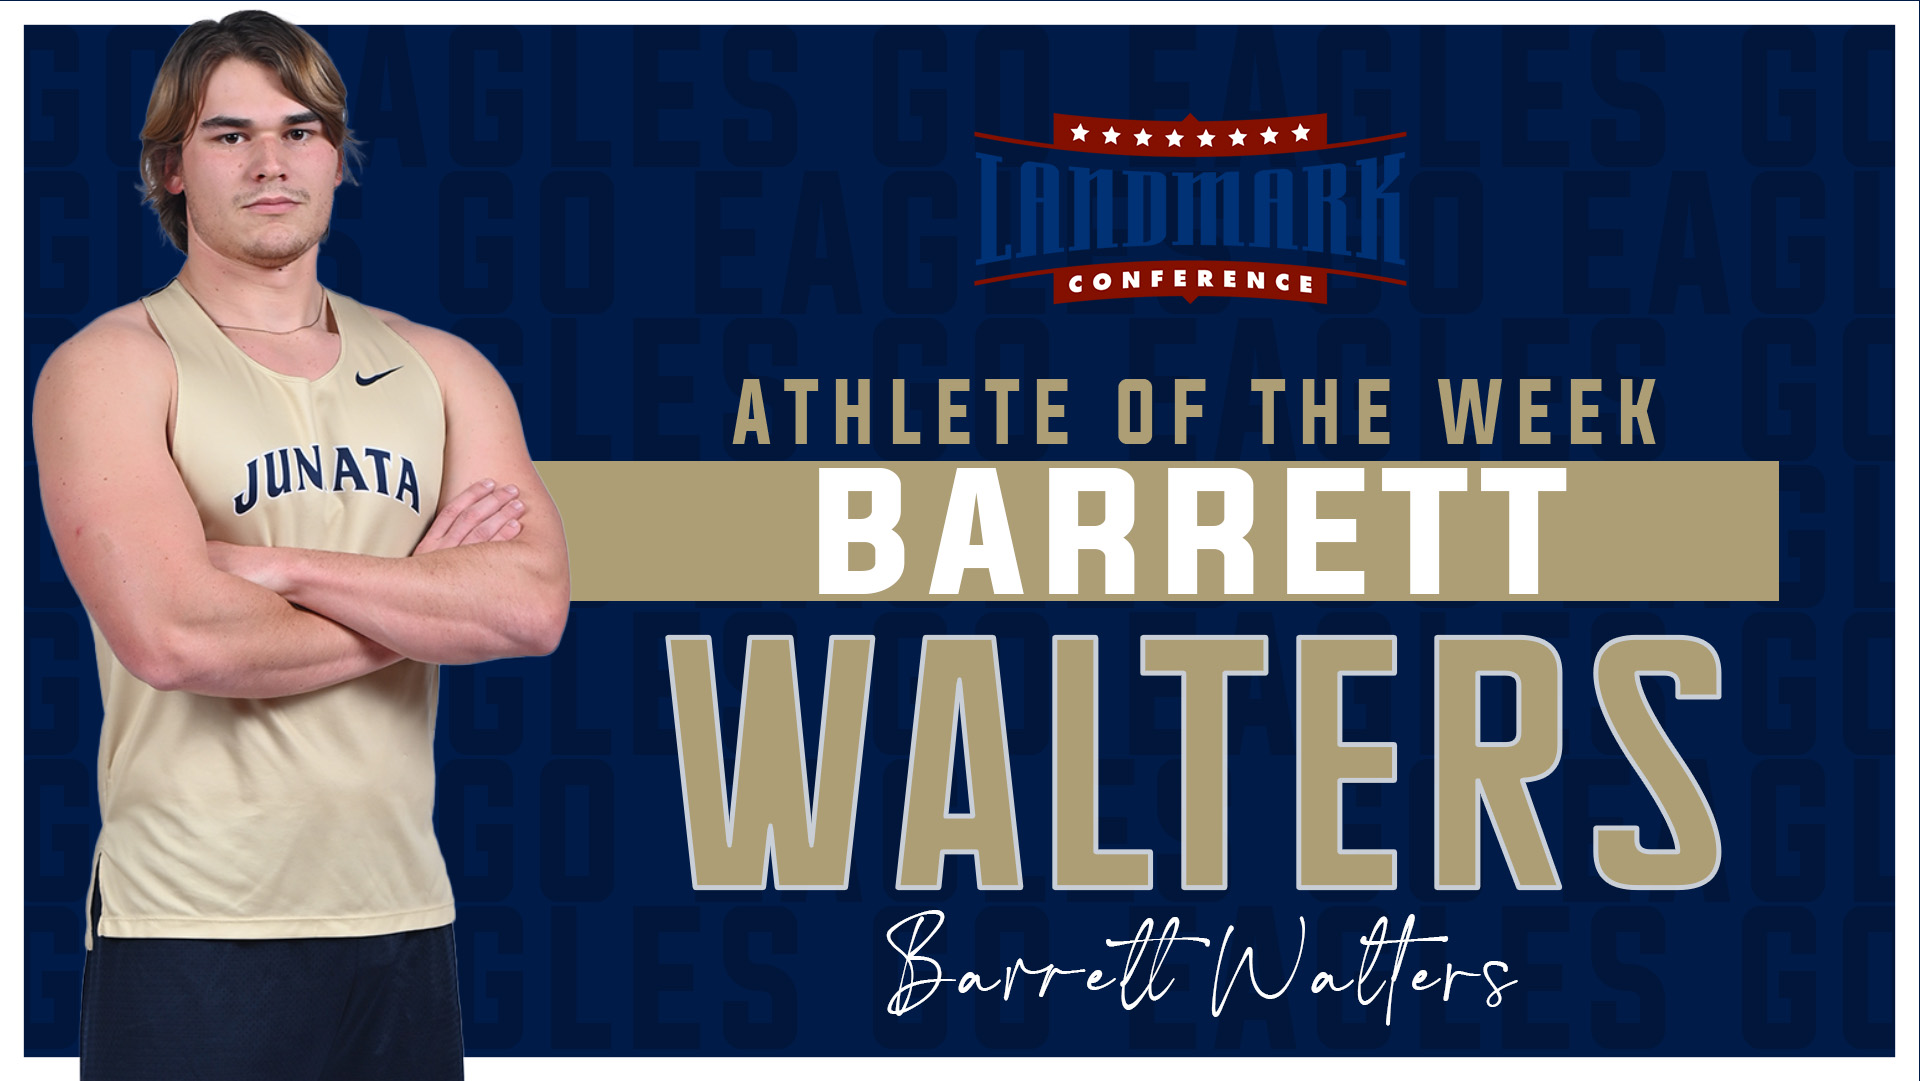 Walters Named Landmark Athlete of the Week for Second Time